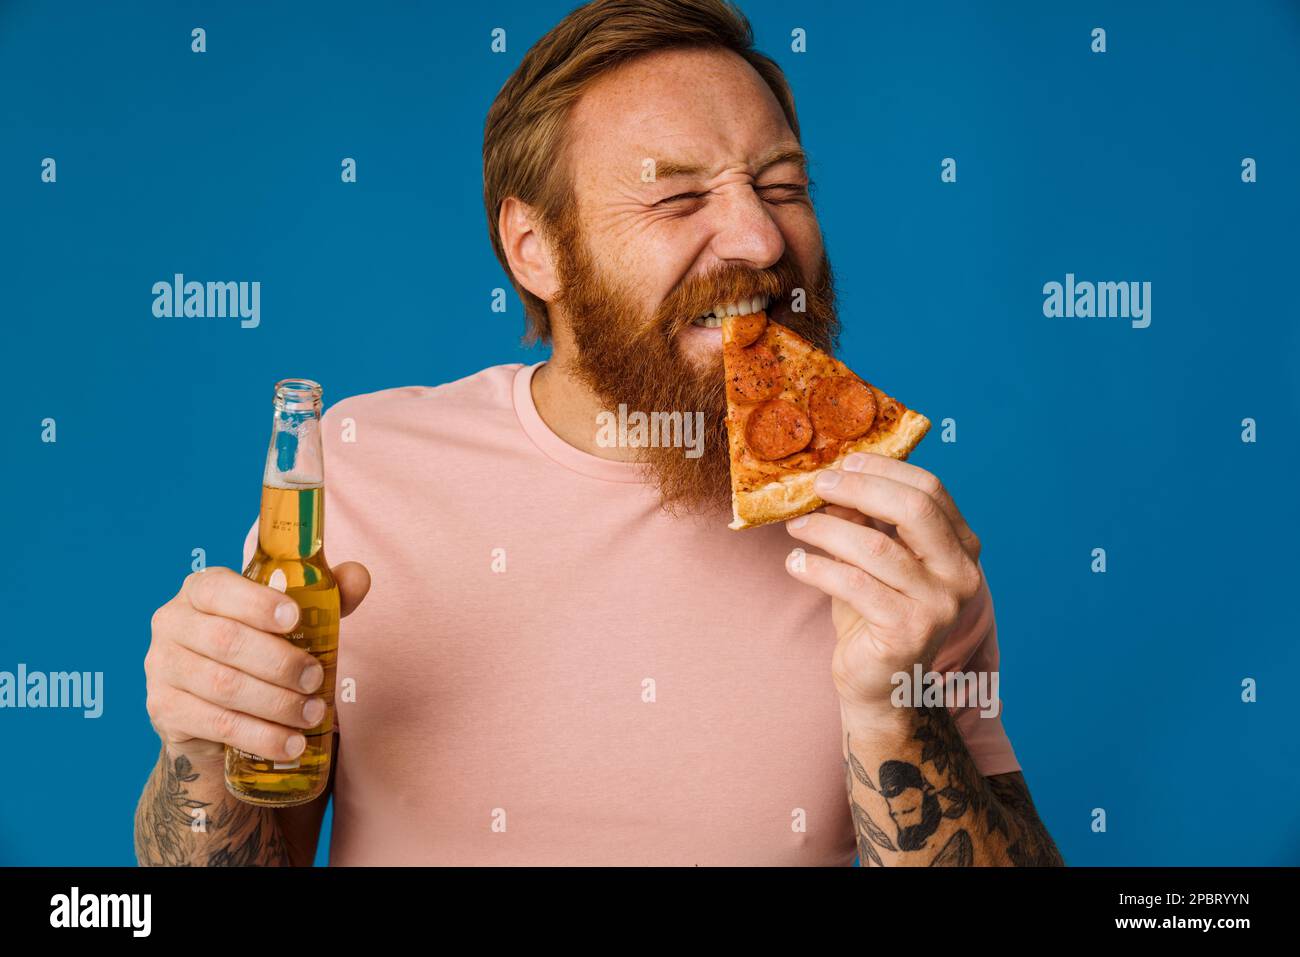 Bearded happy man holding pizza slice and beer while standing isolated over blue background Stock Photo